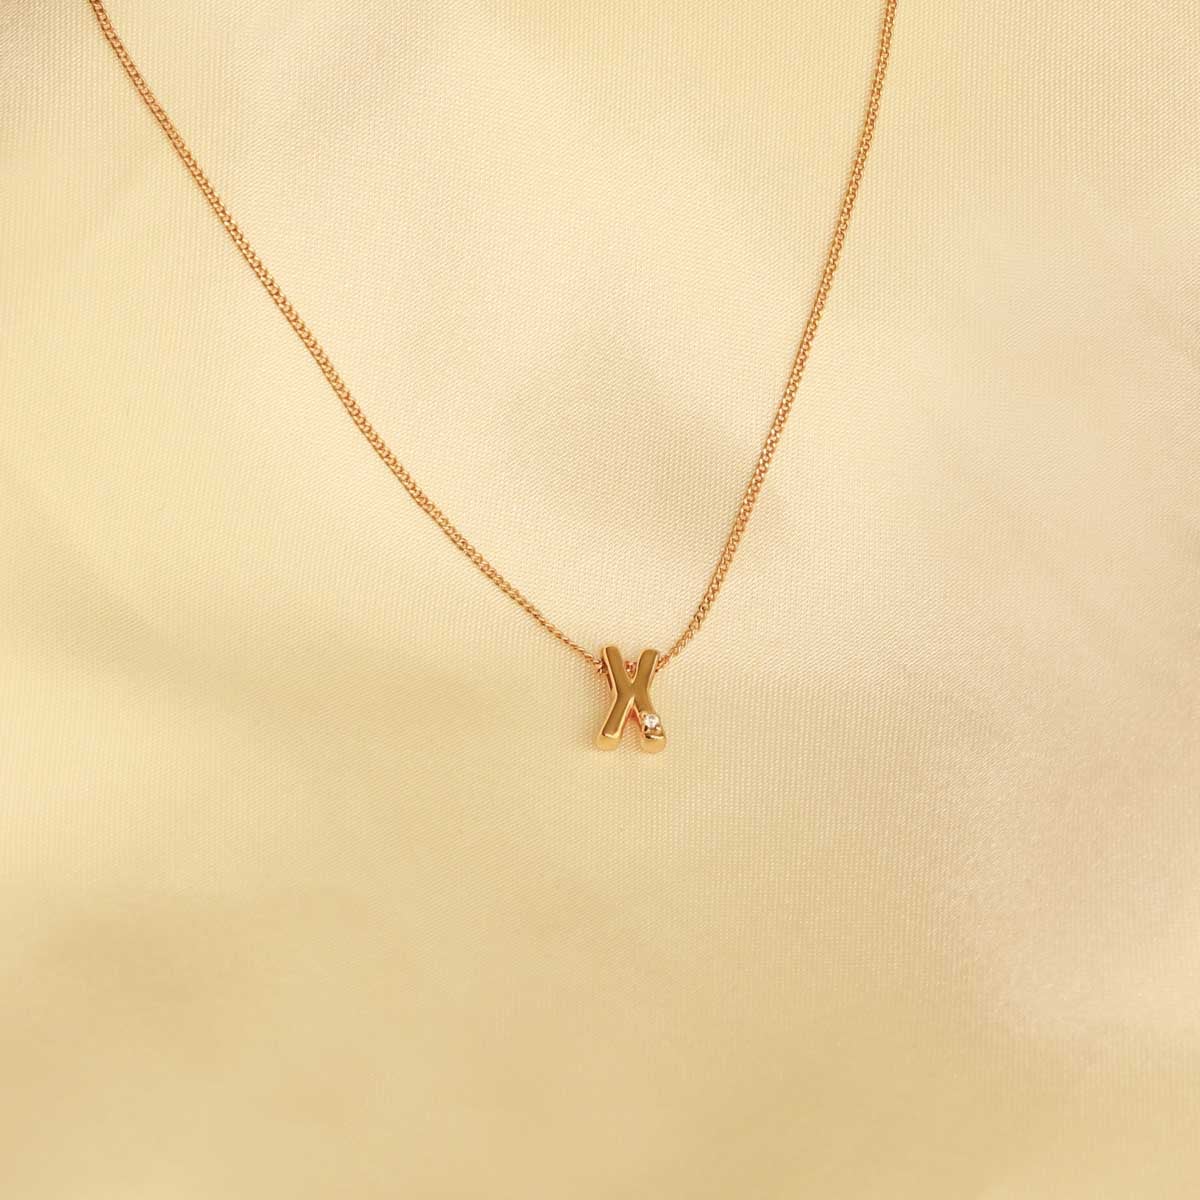 Flat lay shot of X Initial Pendant Necklace in Gold